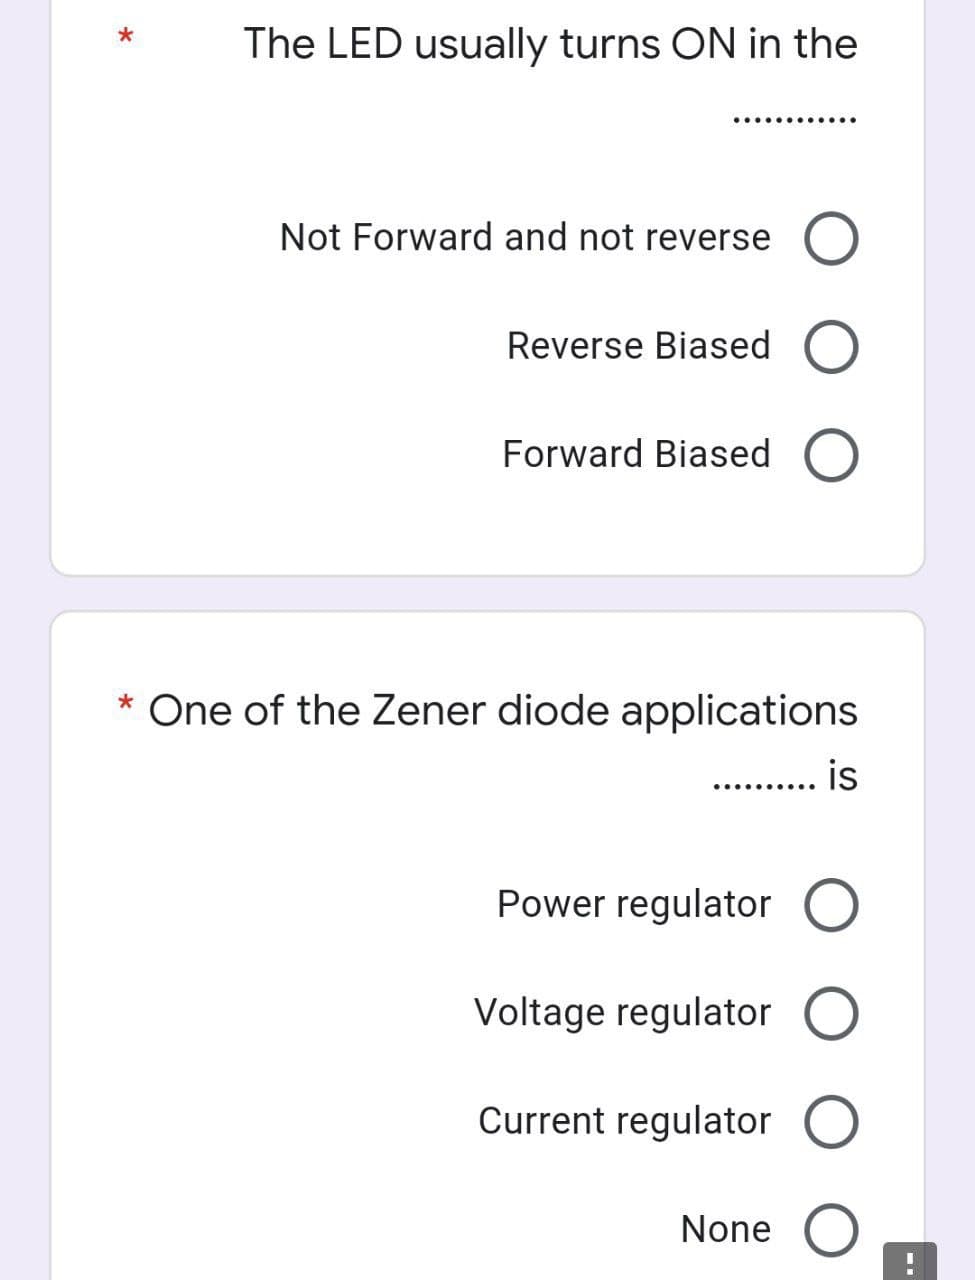 The LED usually turns ON in the
..........
Not Forward and not reverse O
Reverse Biased O
Forward Biased O
* One of the Zener diode applications
.......... is
Power regulator O
Voltage regulator O
Current regulator O
None
*